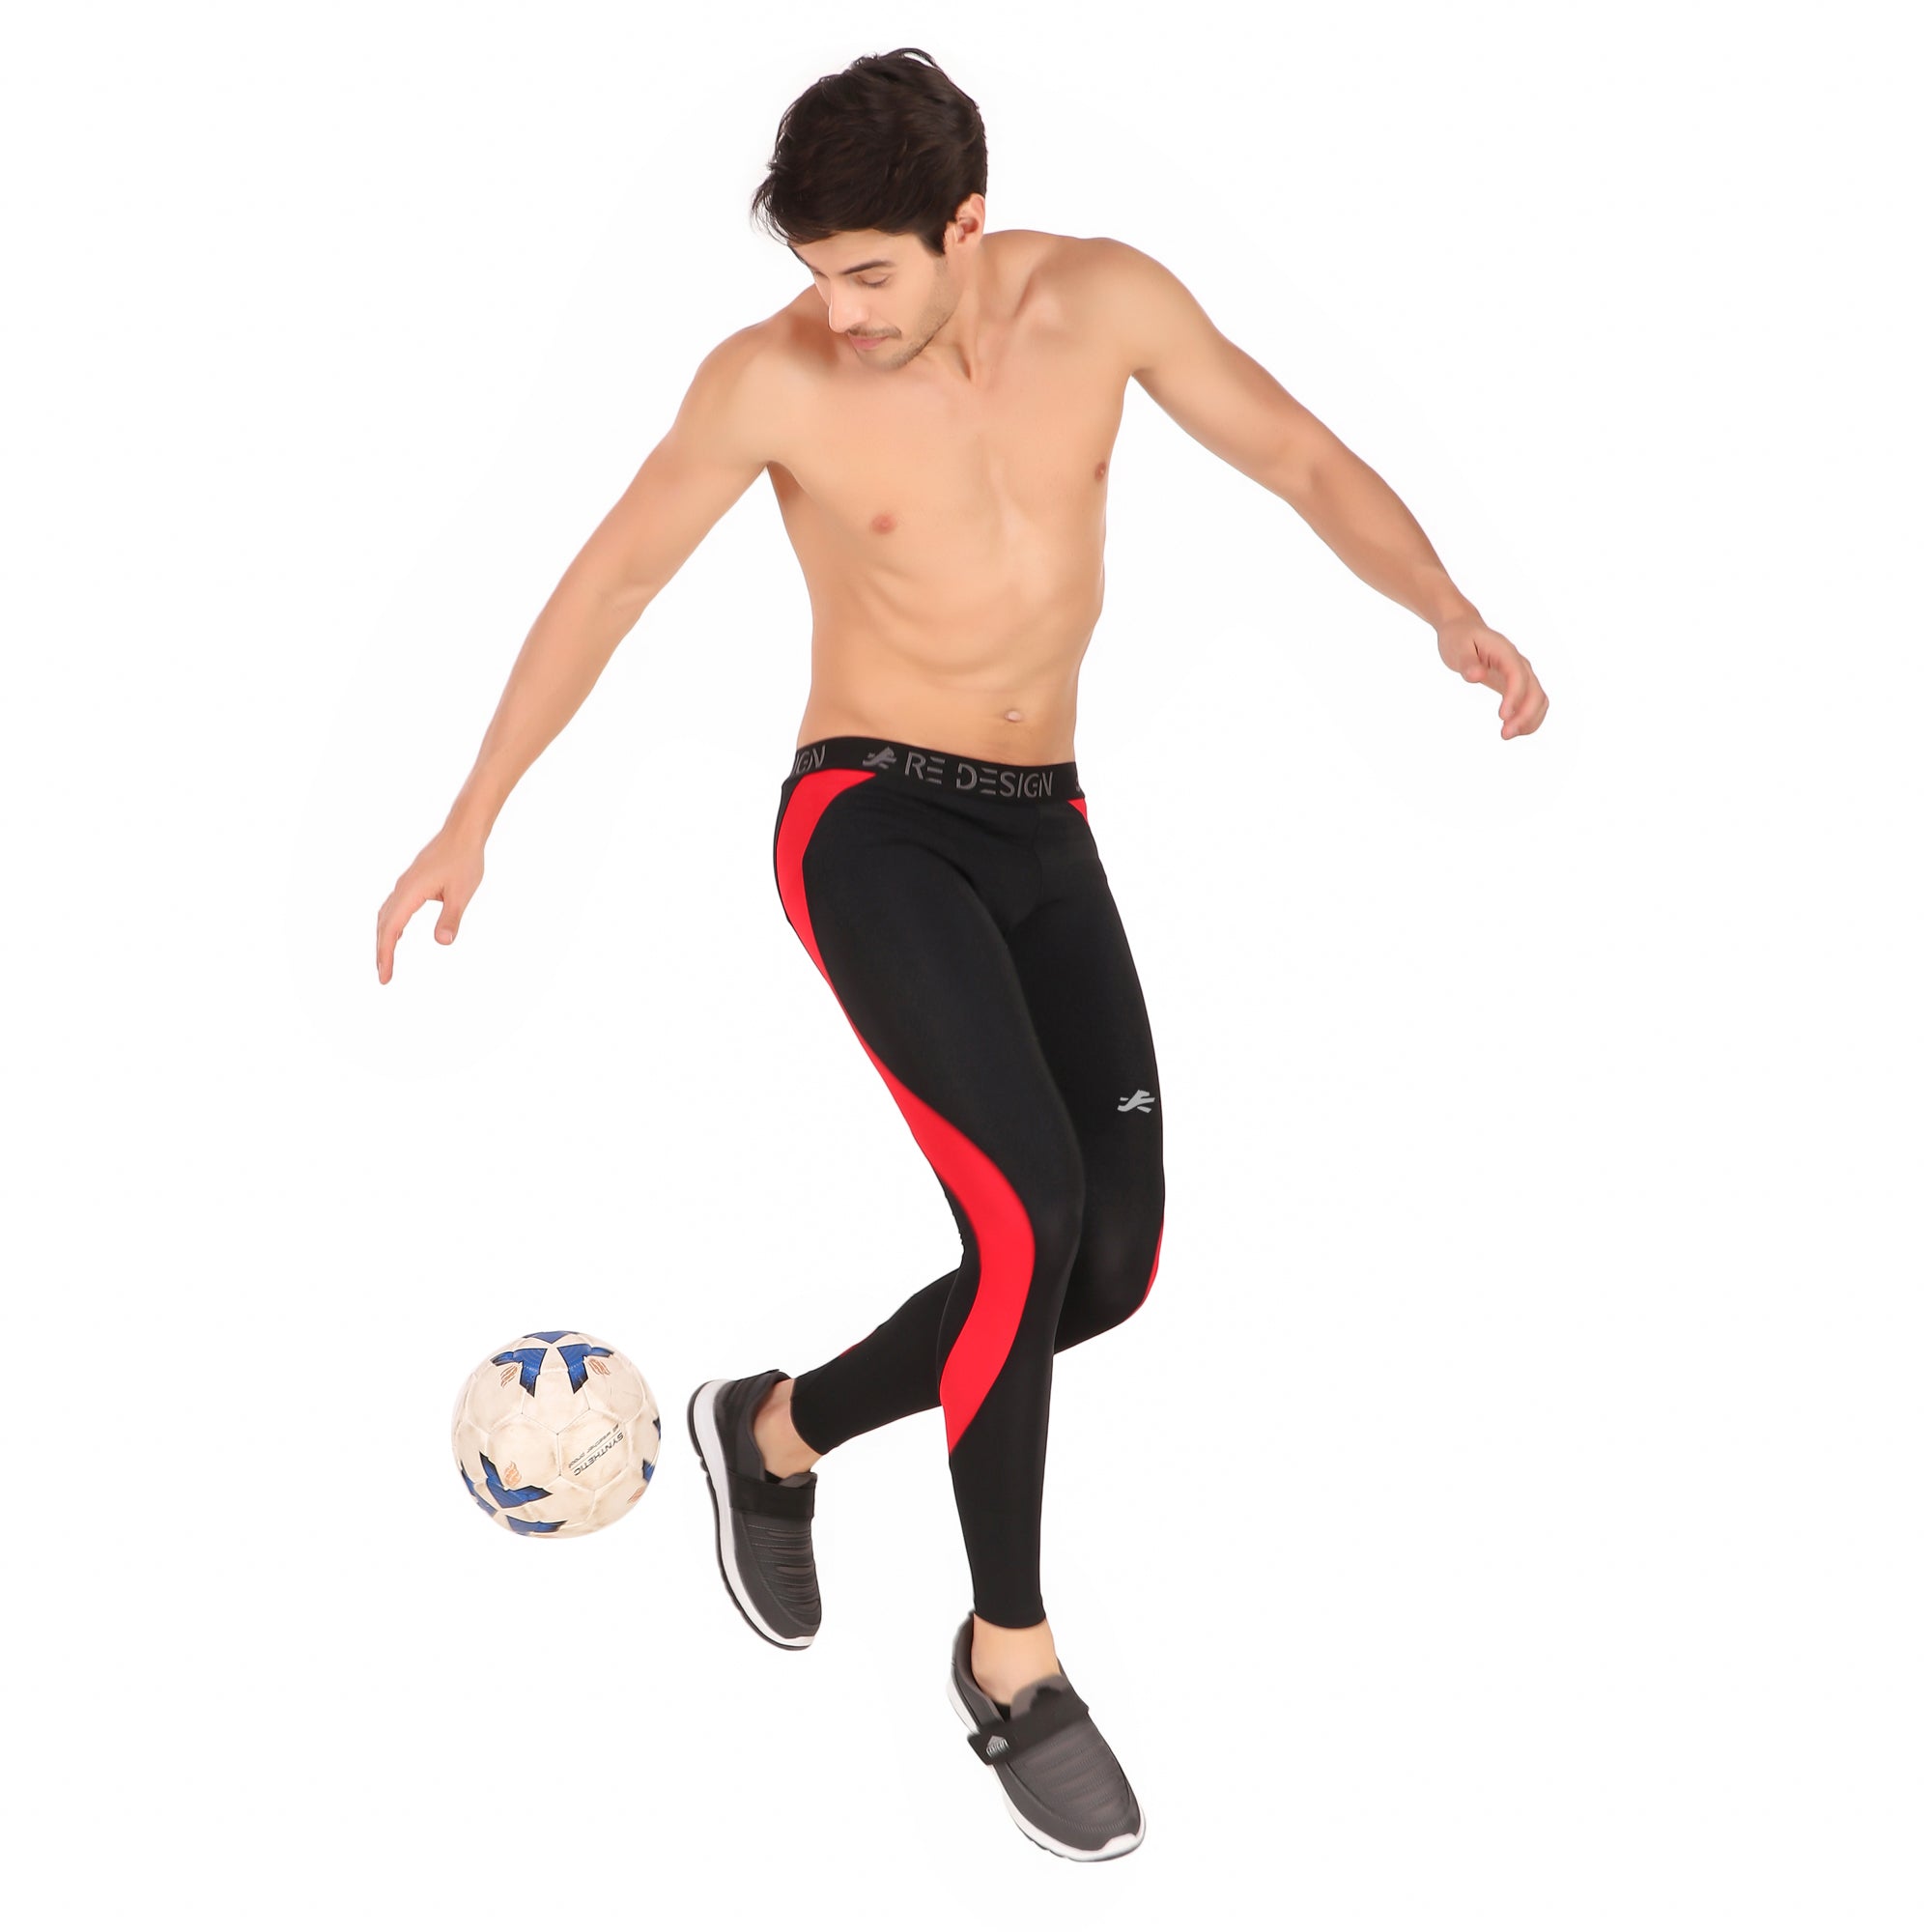 Nylon Compression Pant and Full Tights For Men (BLACK/RED)